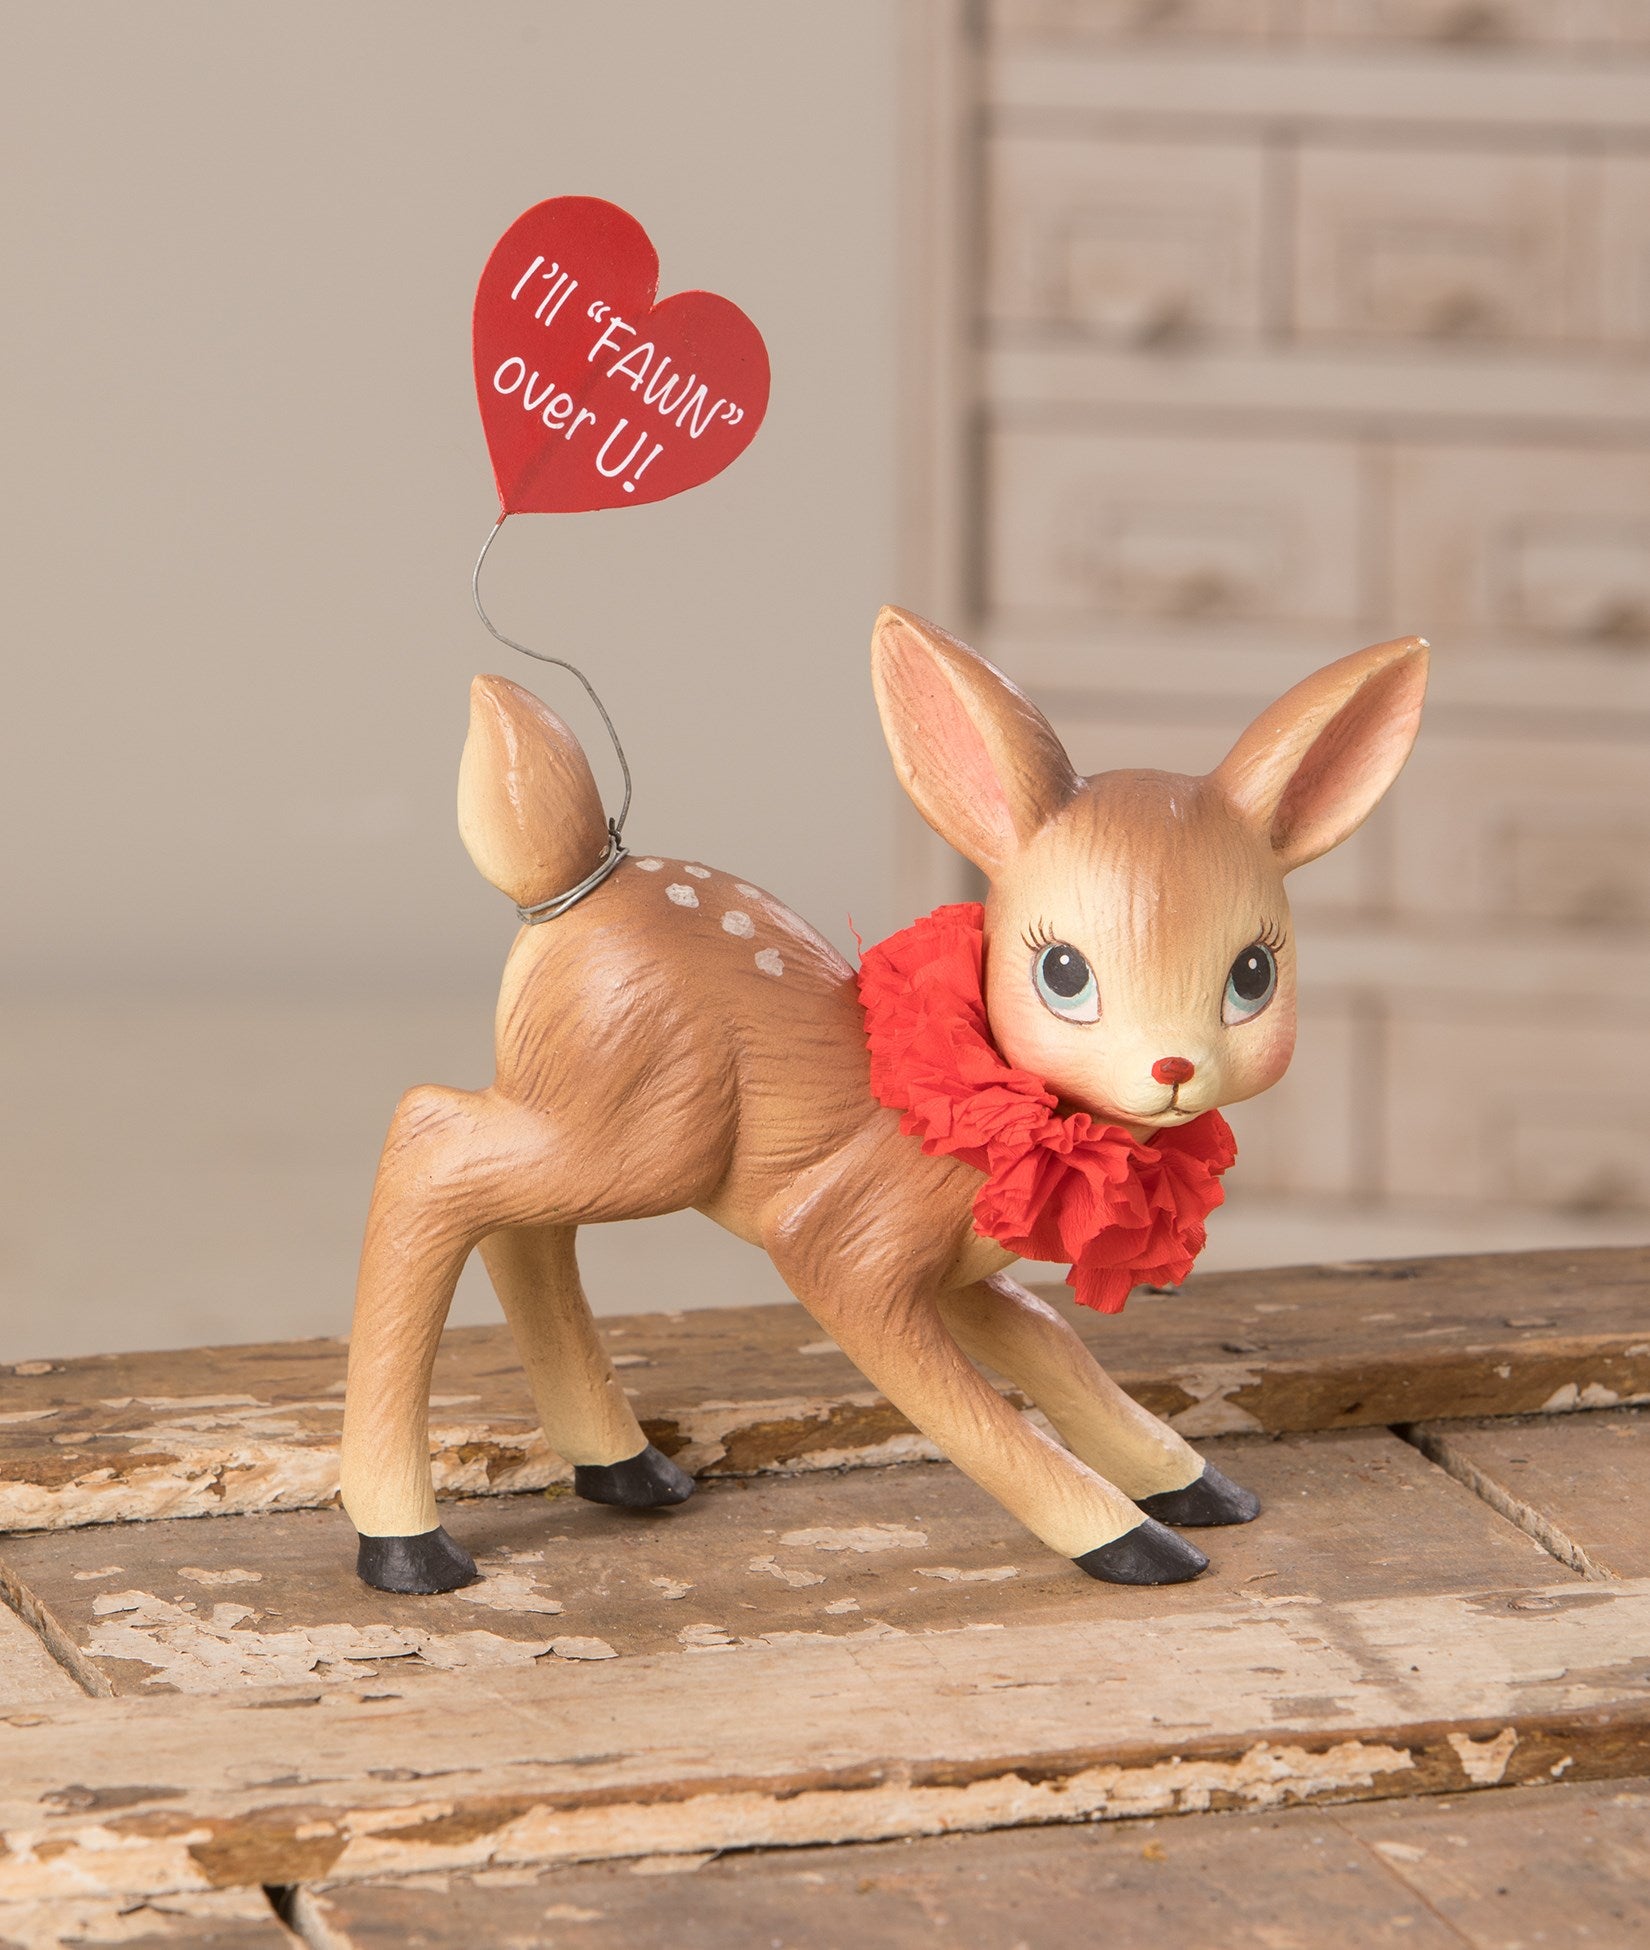 Fawning Over You Deer Valentine by Bethany Lowe